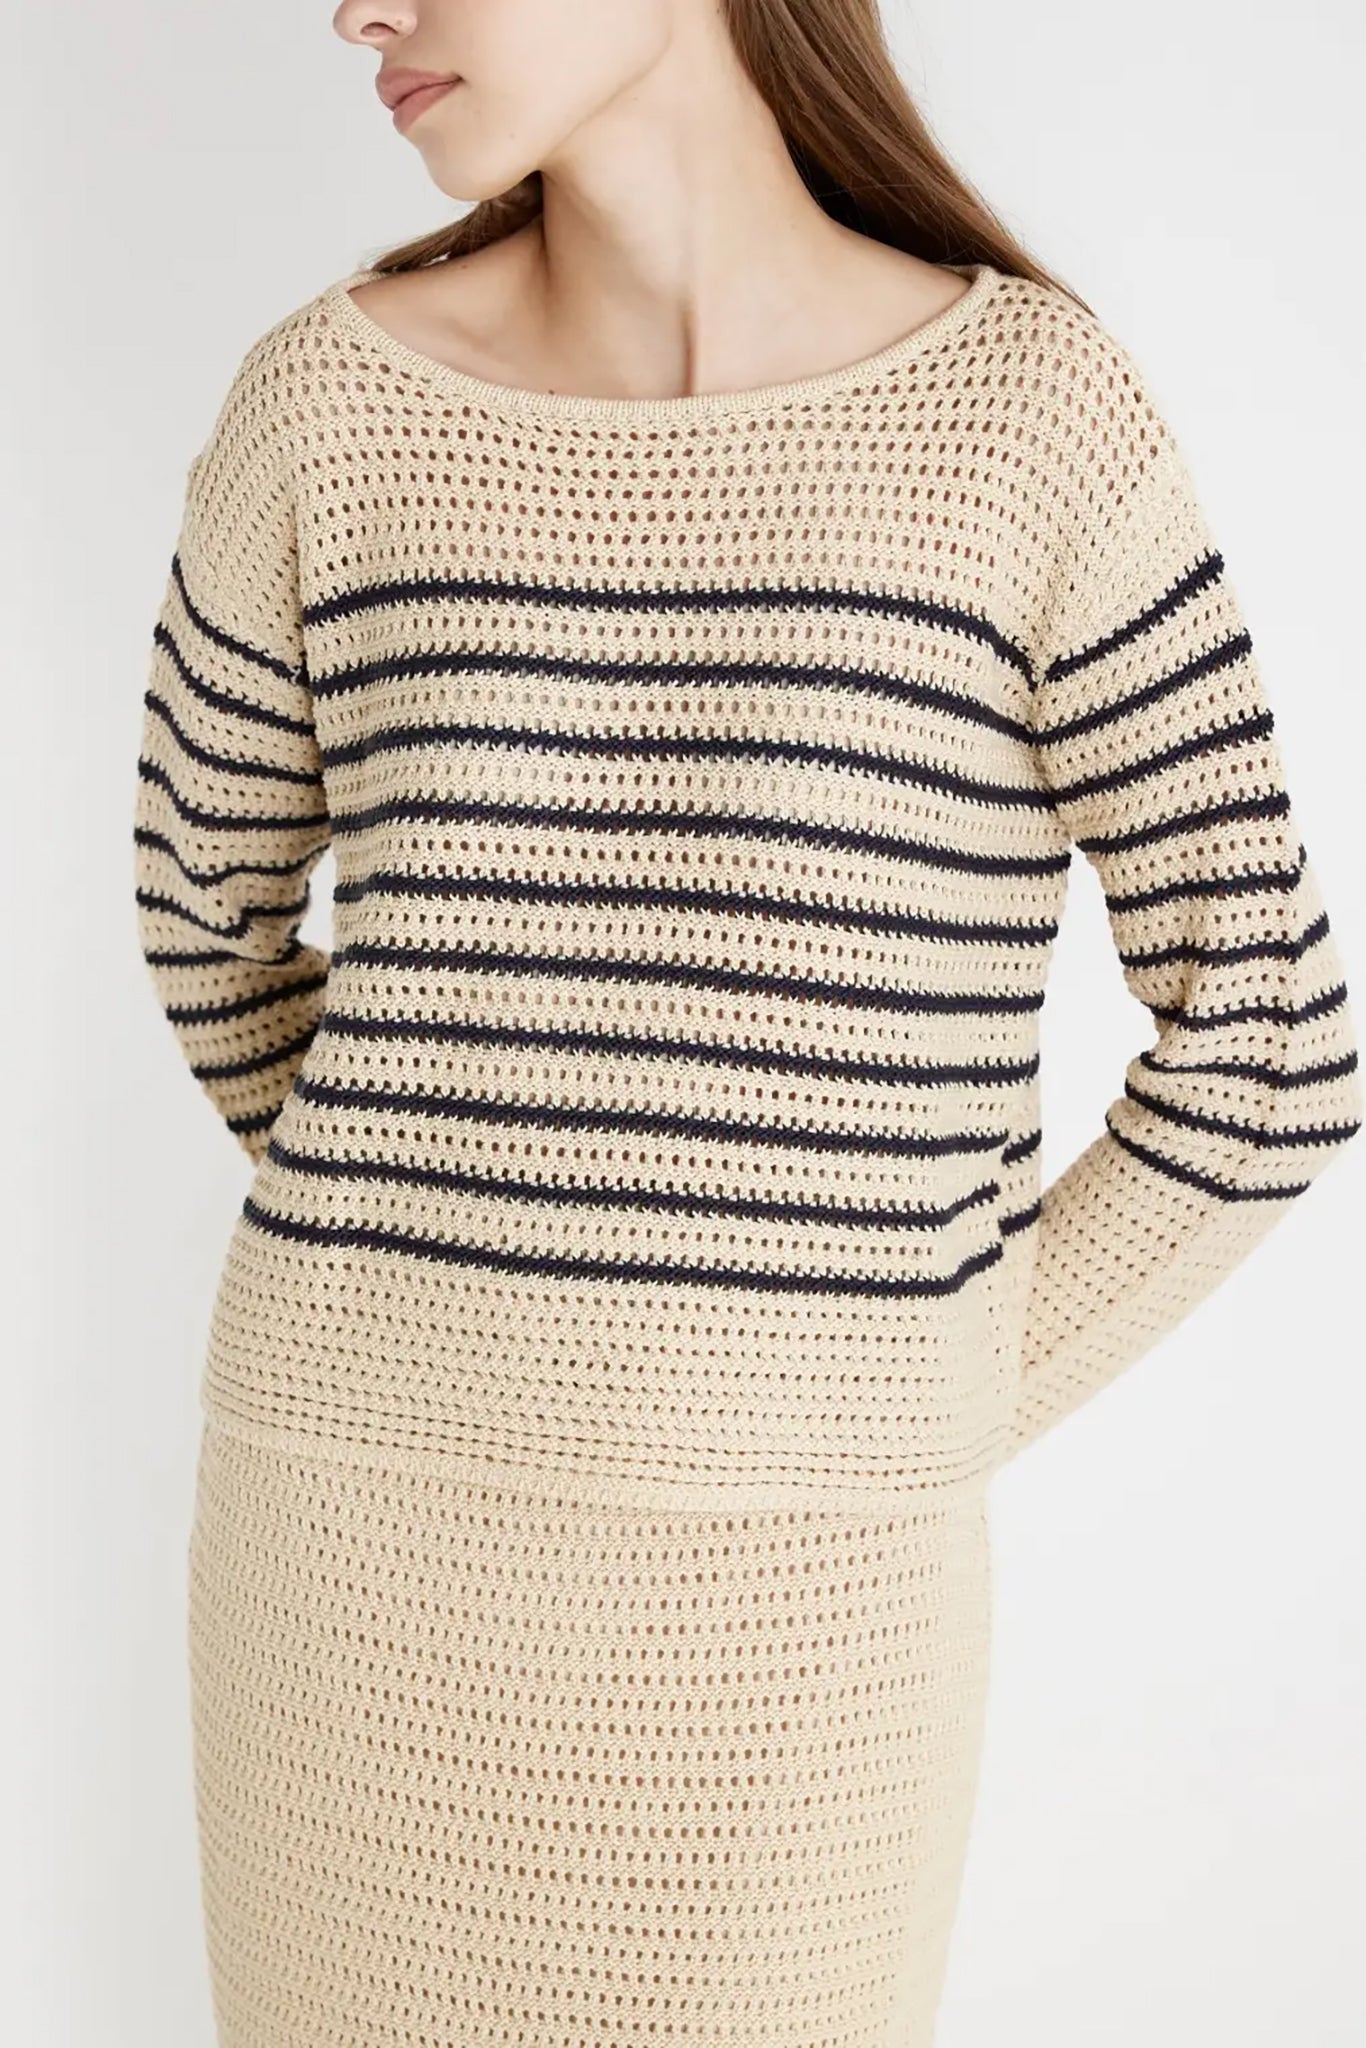 The Colie Sweater